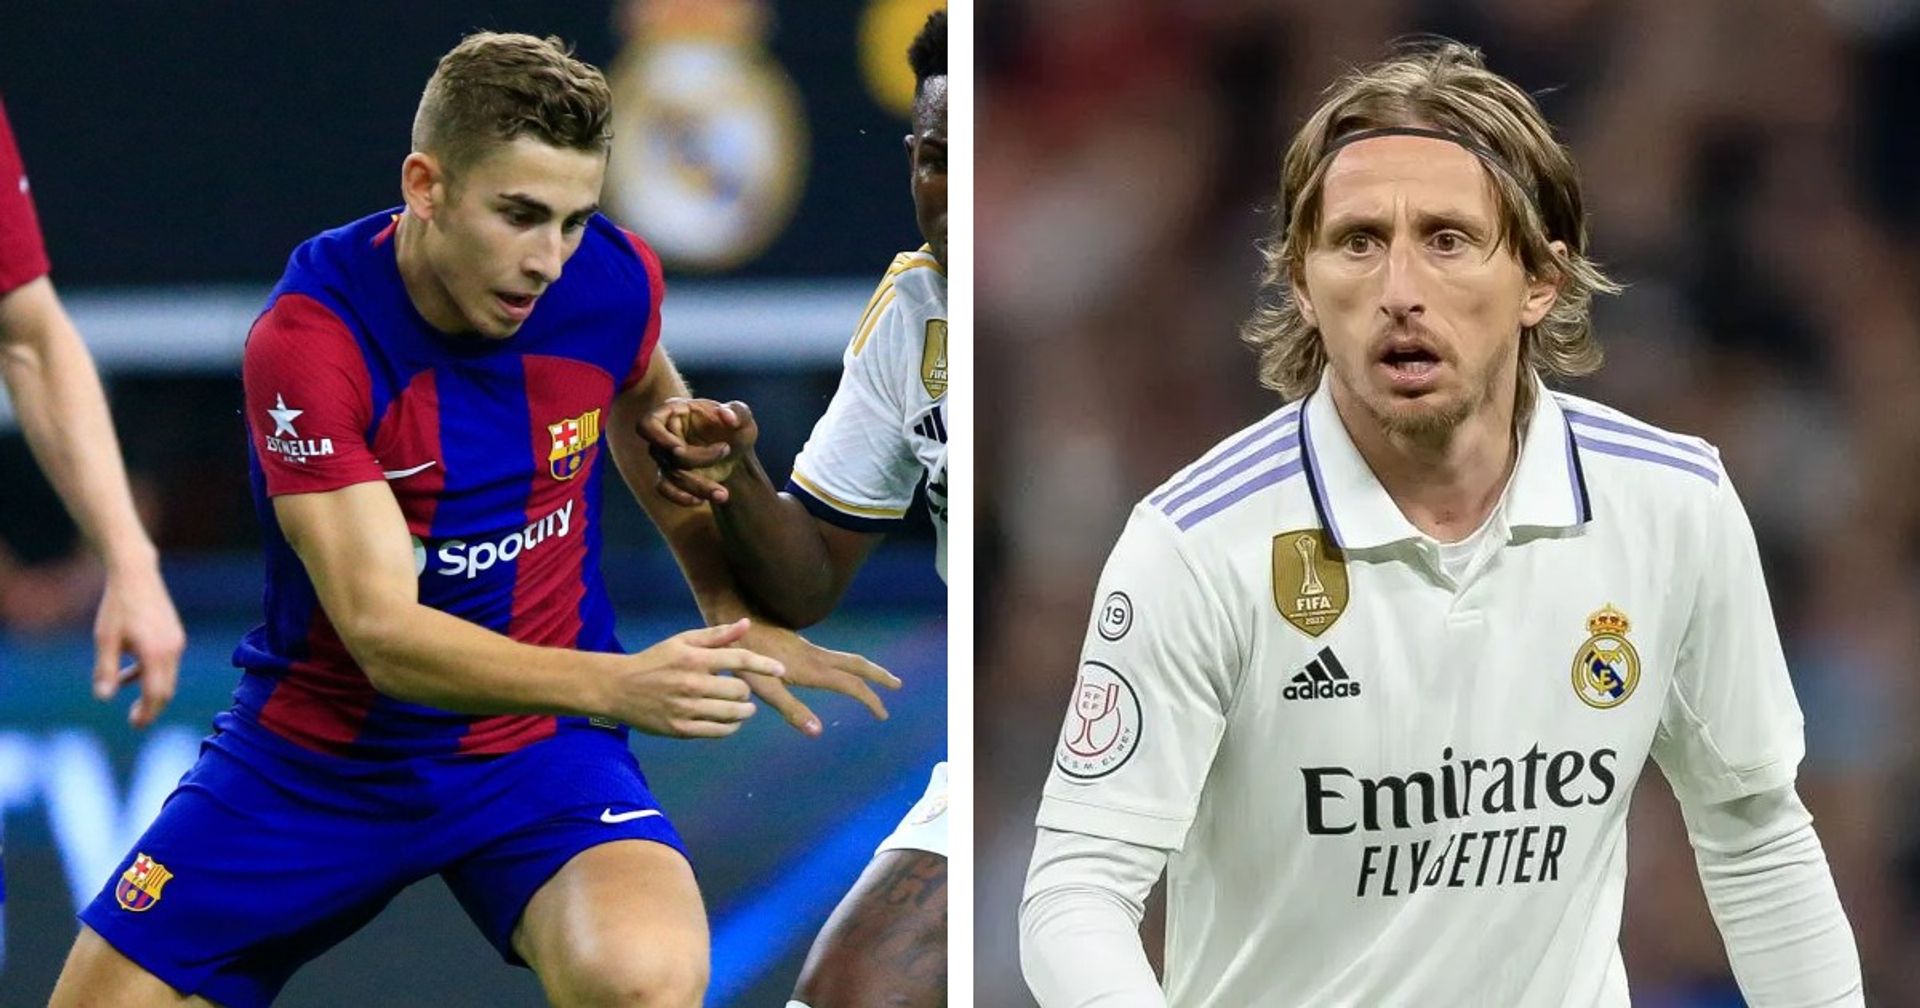 Barcelona youngster names Real Madrid midfielder as his toughest